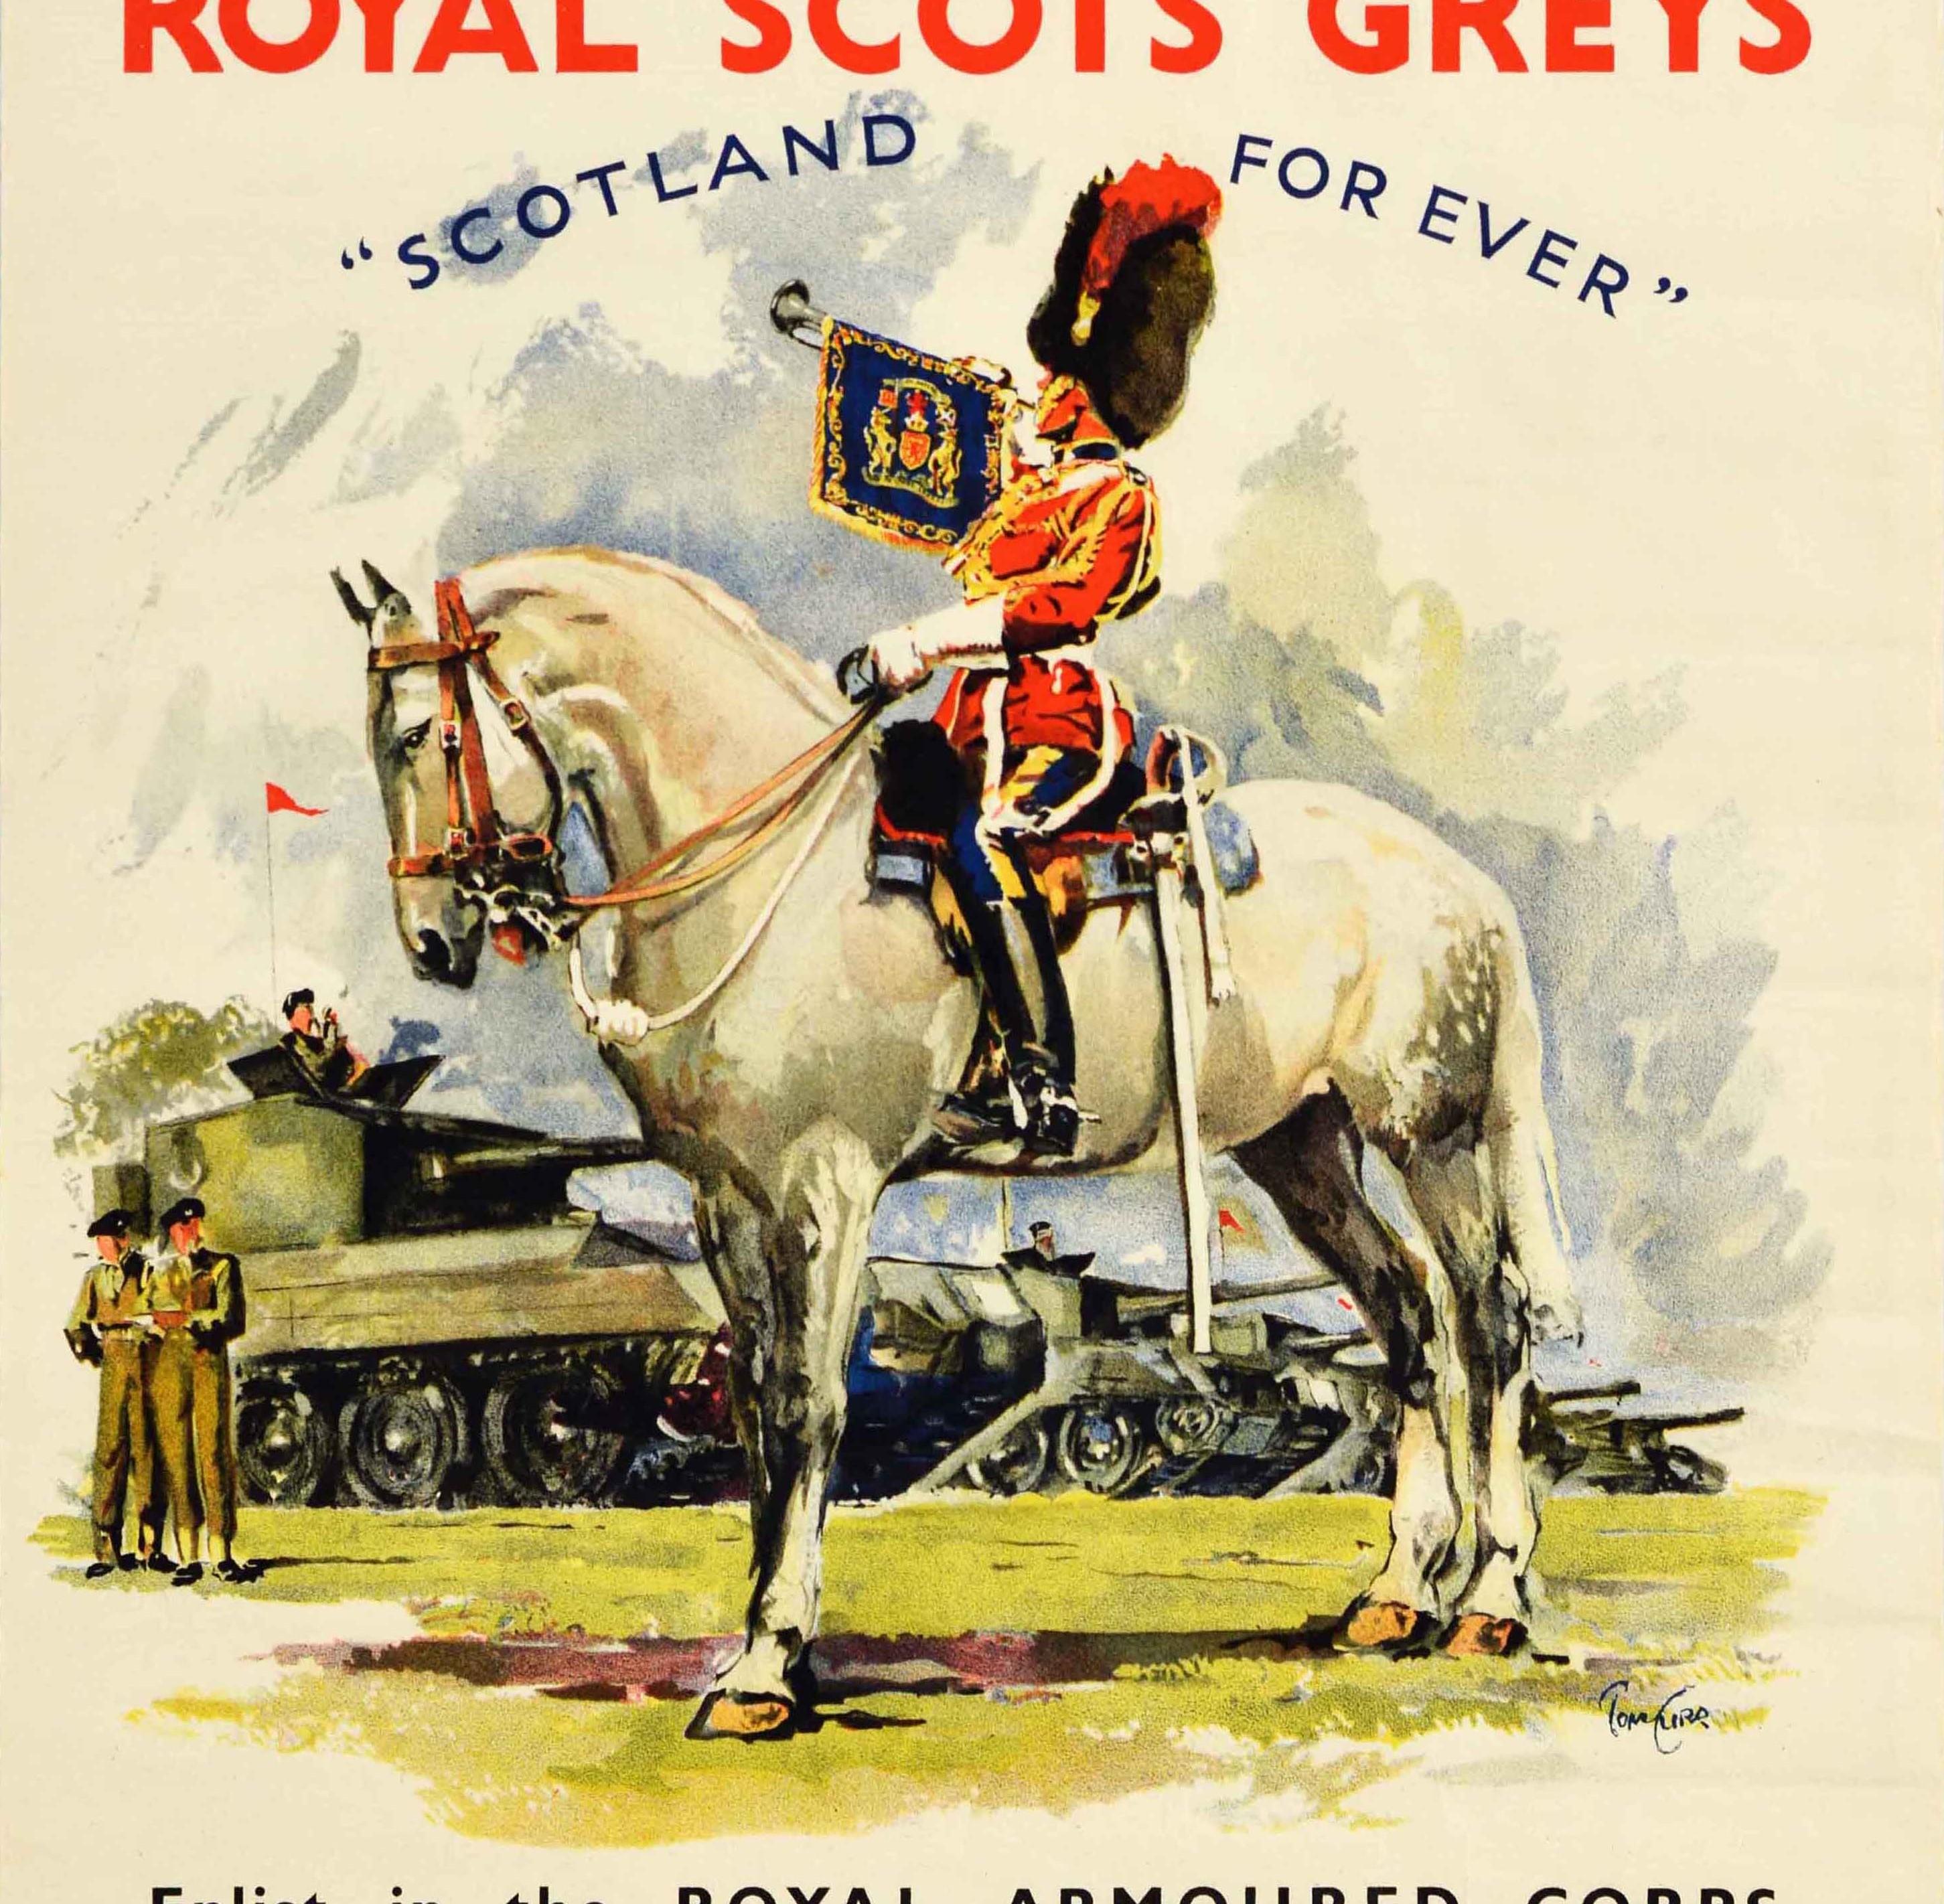 Original Vintage Military Poster Royal Scots Greys Scotland For Ever Armoured C. - Beige Print by Tom Curr